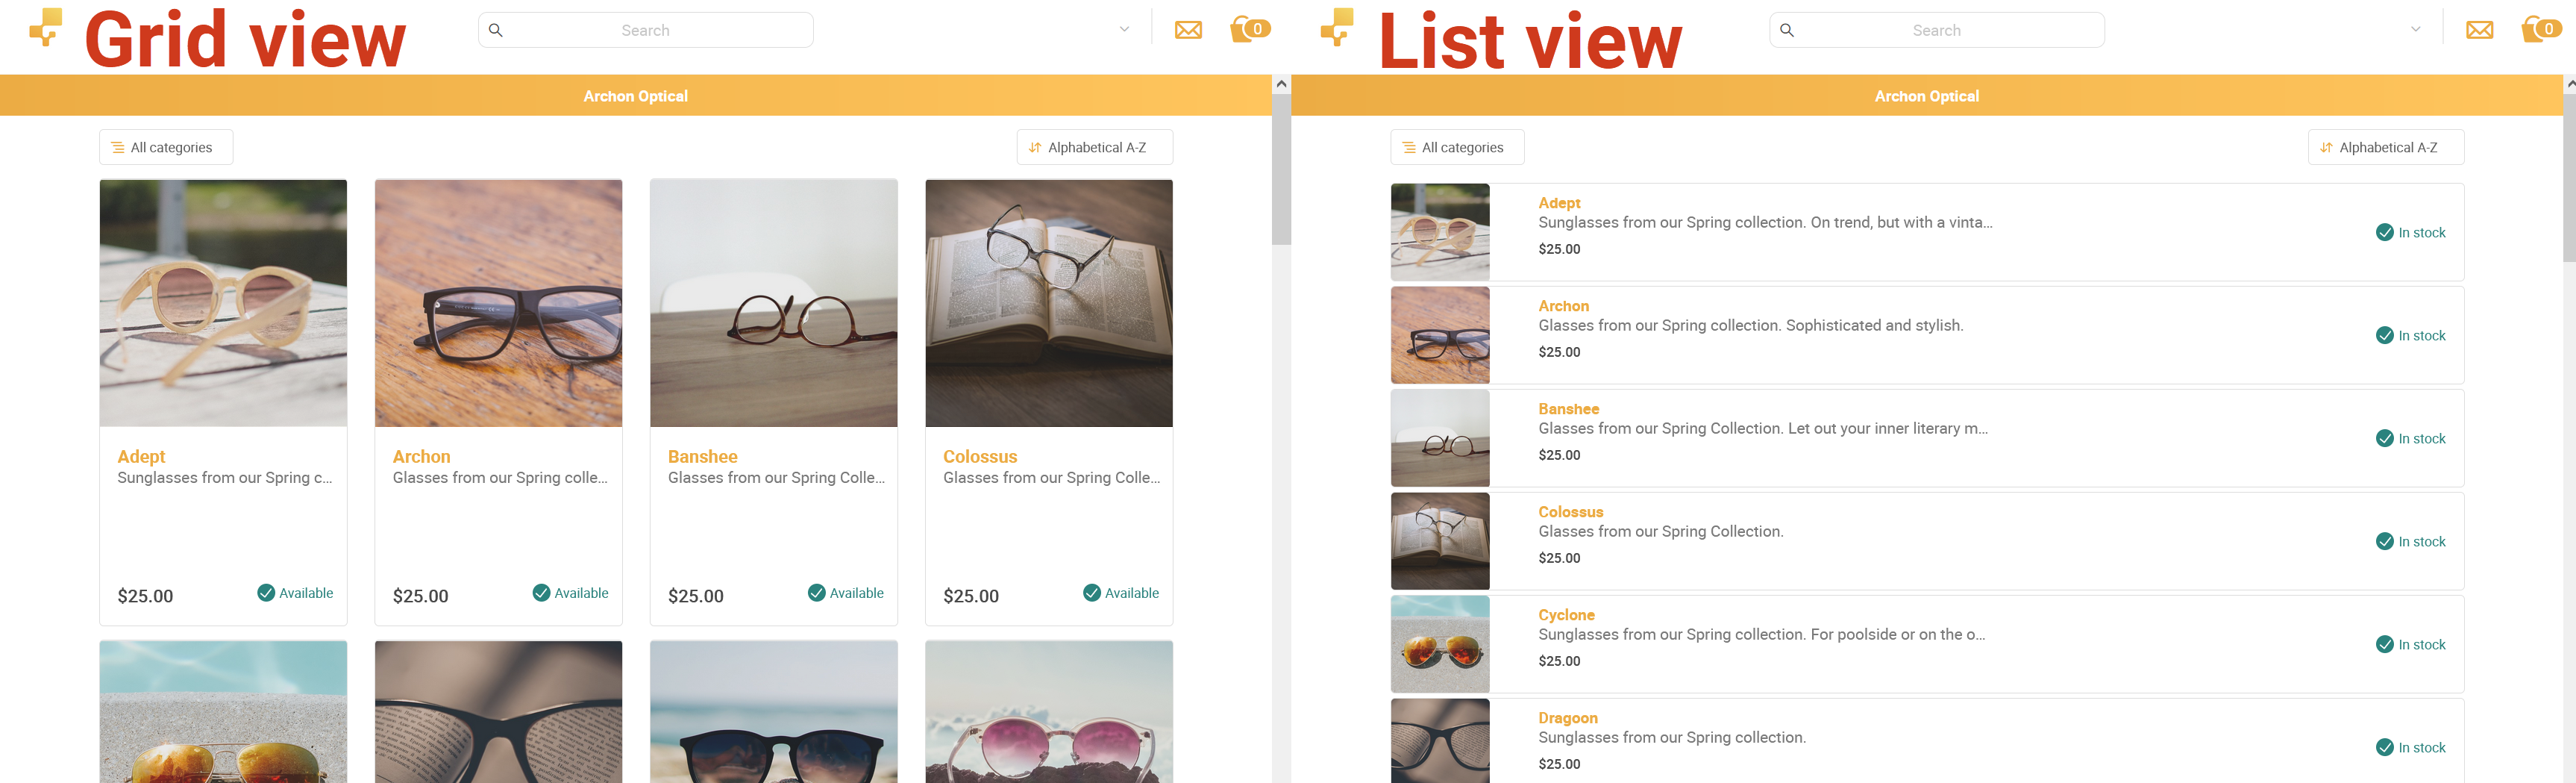 Showroom product view options. To the left is Grid View, and to the right is the List view. 